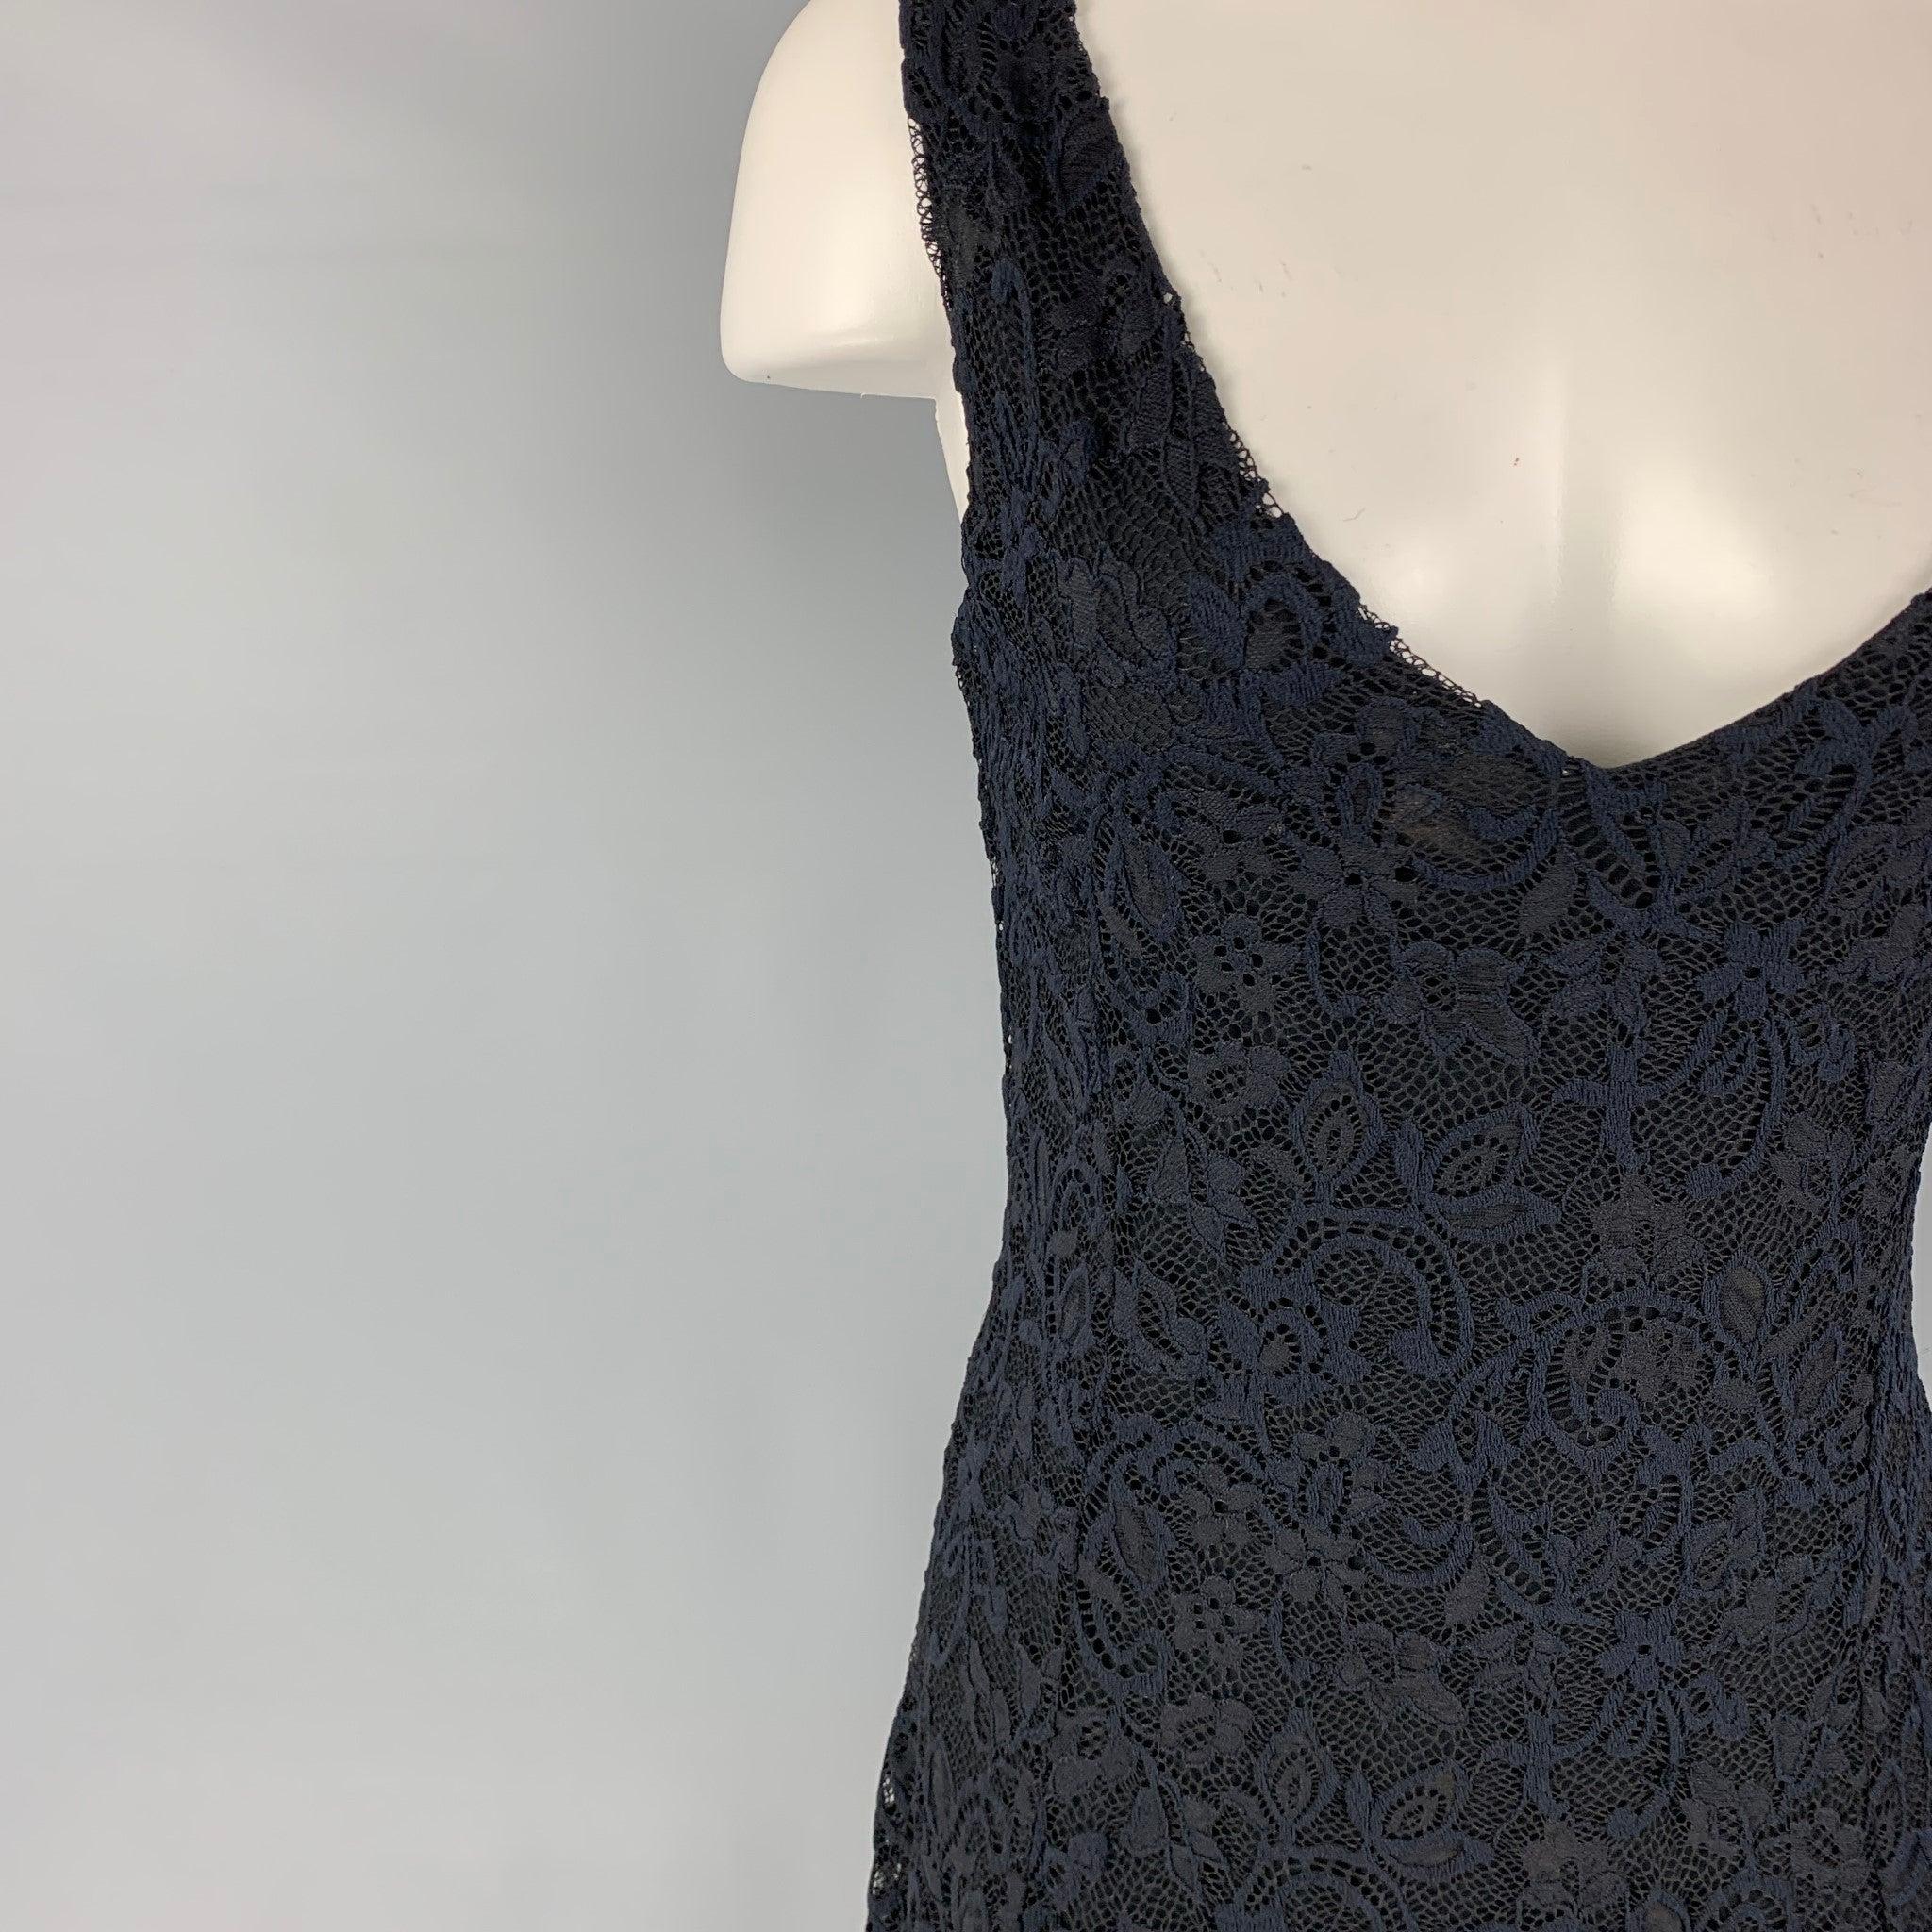 RALPH LAUREN Blue Label dress comes in a navy lace nylon with a slip liner featuring an a-line style, sleeveless, and a v-neck.
Excellent
Pre-Owned Condition. 

Marked:   L  

Measurements: 
  Bust: 30 inches Waist: 28 inches Hip: 36 inches Length: